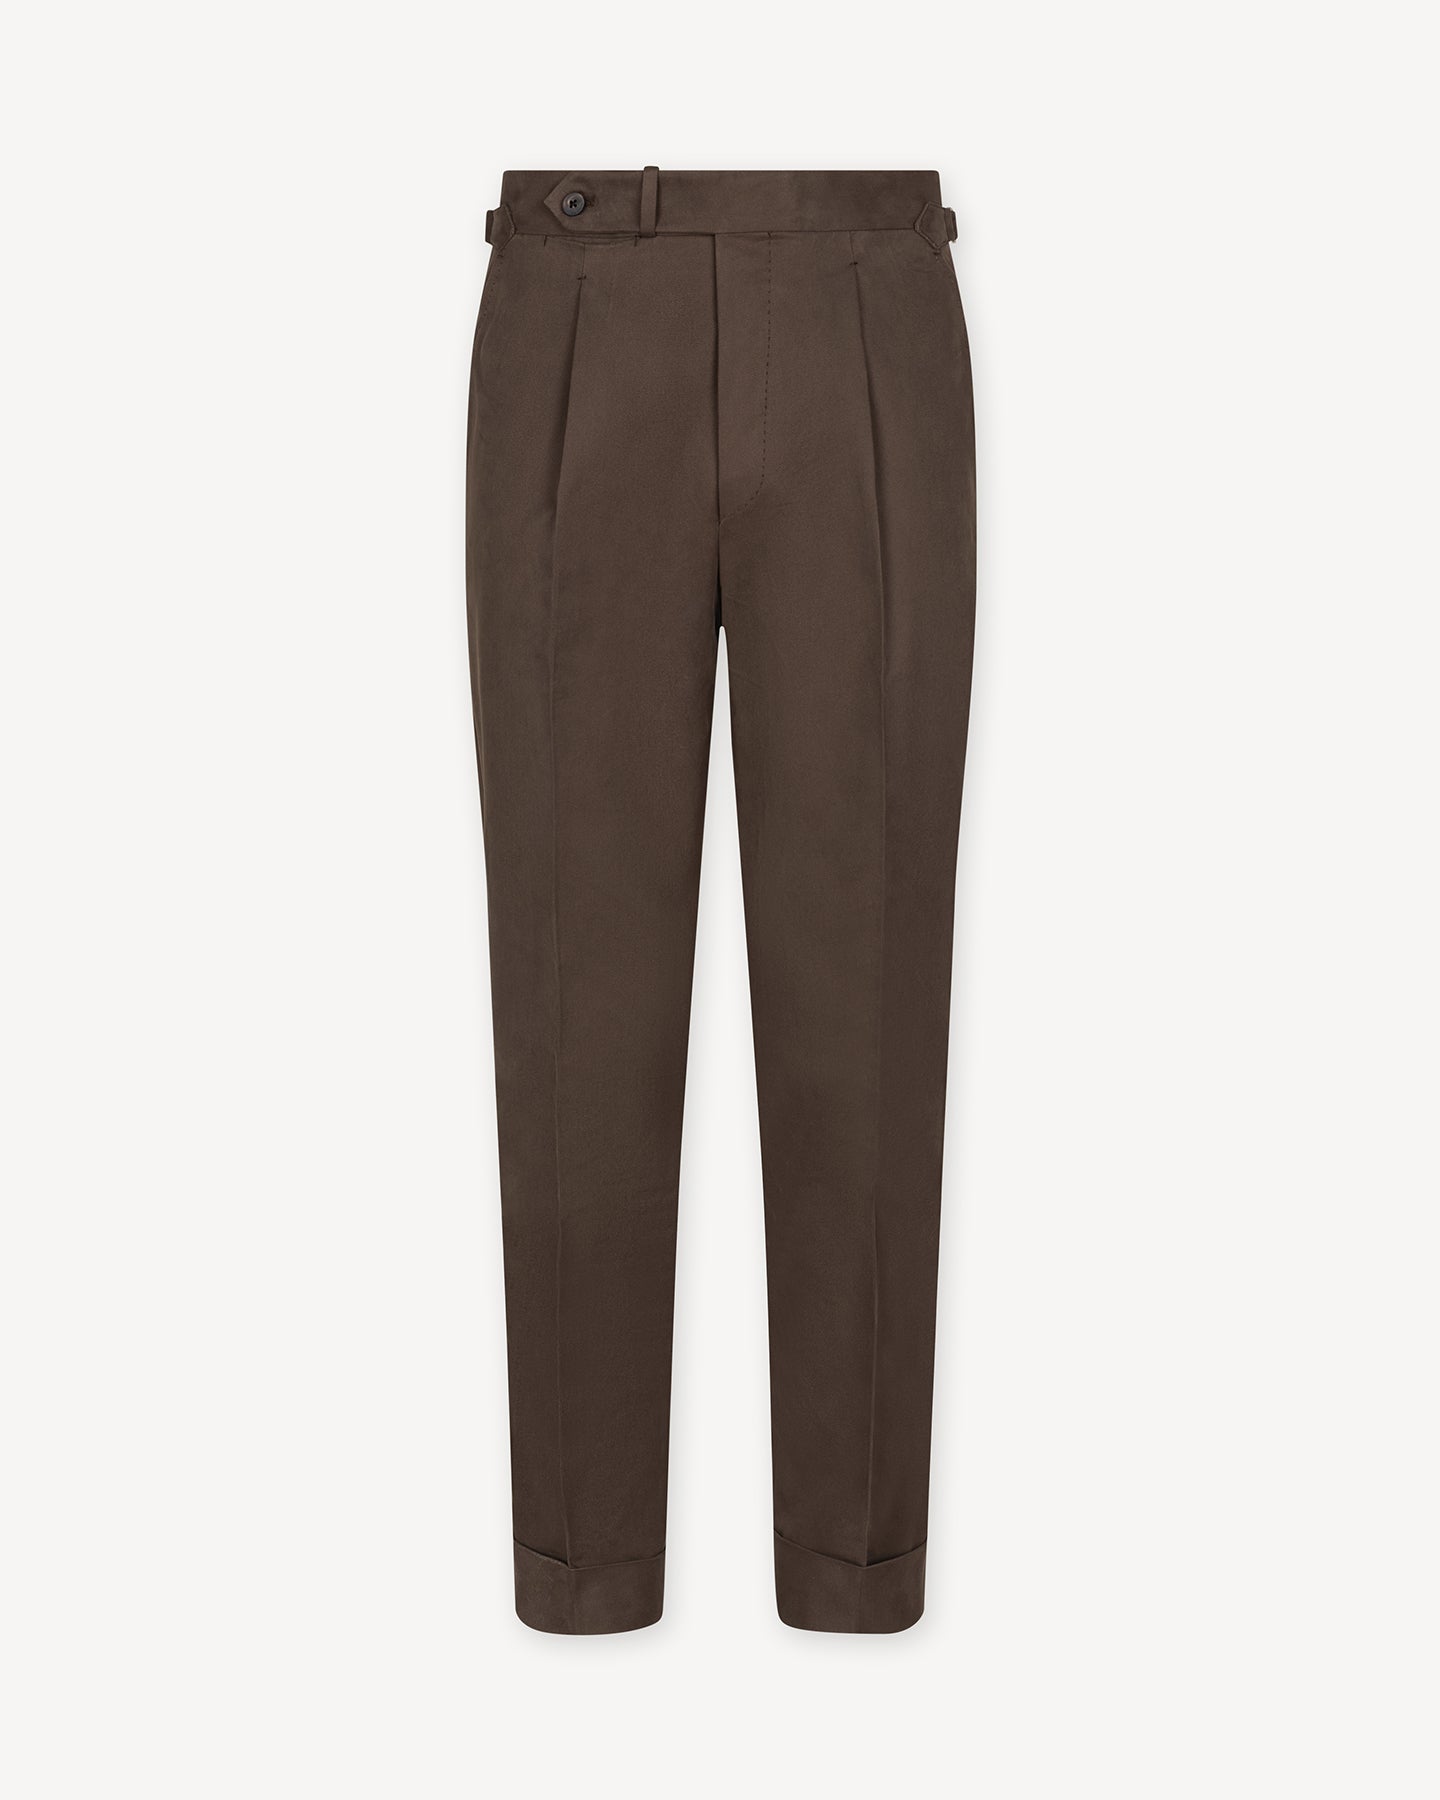 Tobacco cotton trousers with single pleats and side adjusters